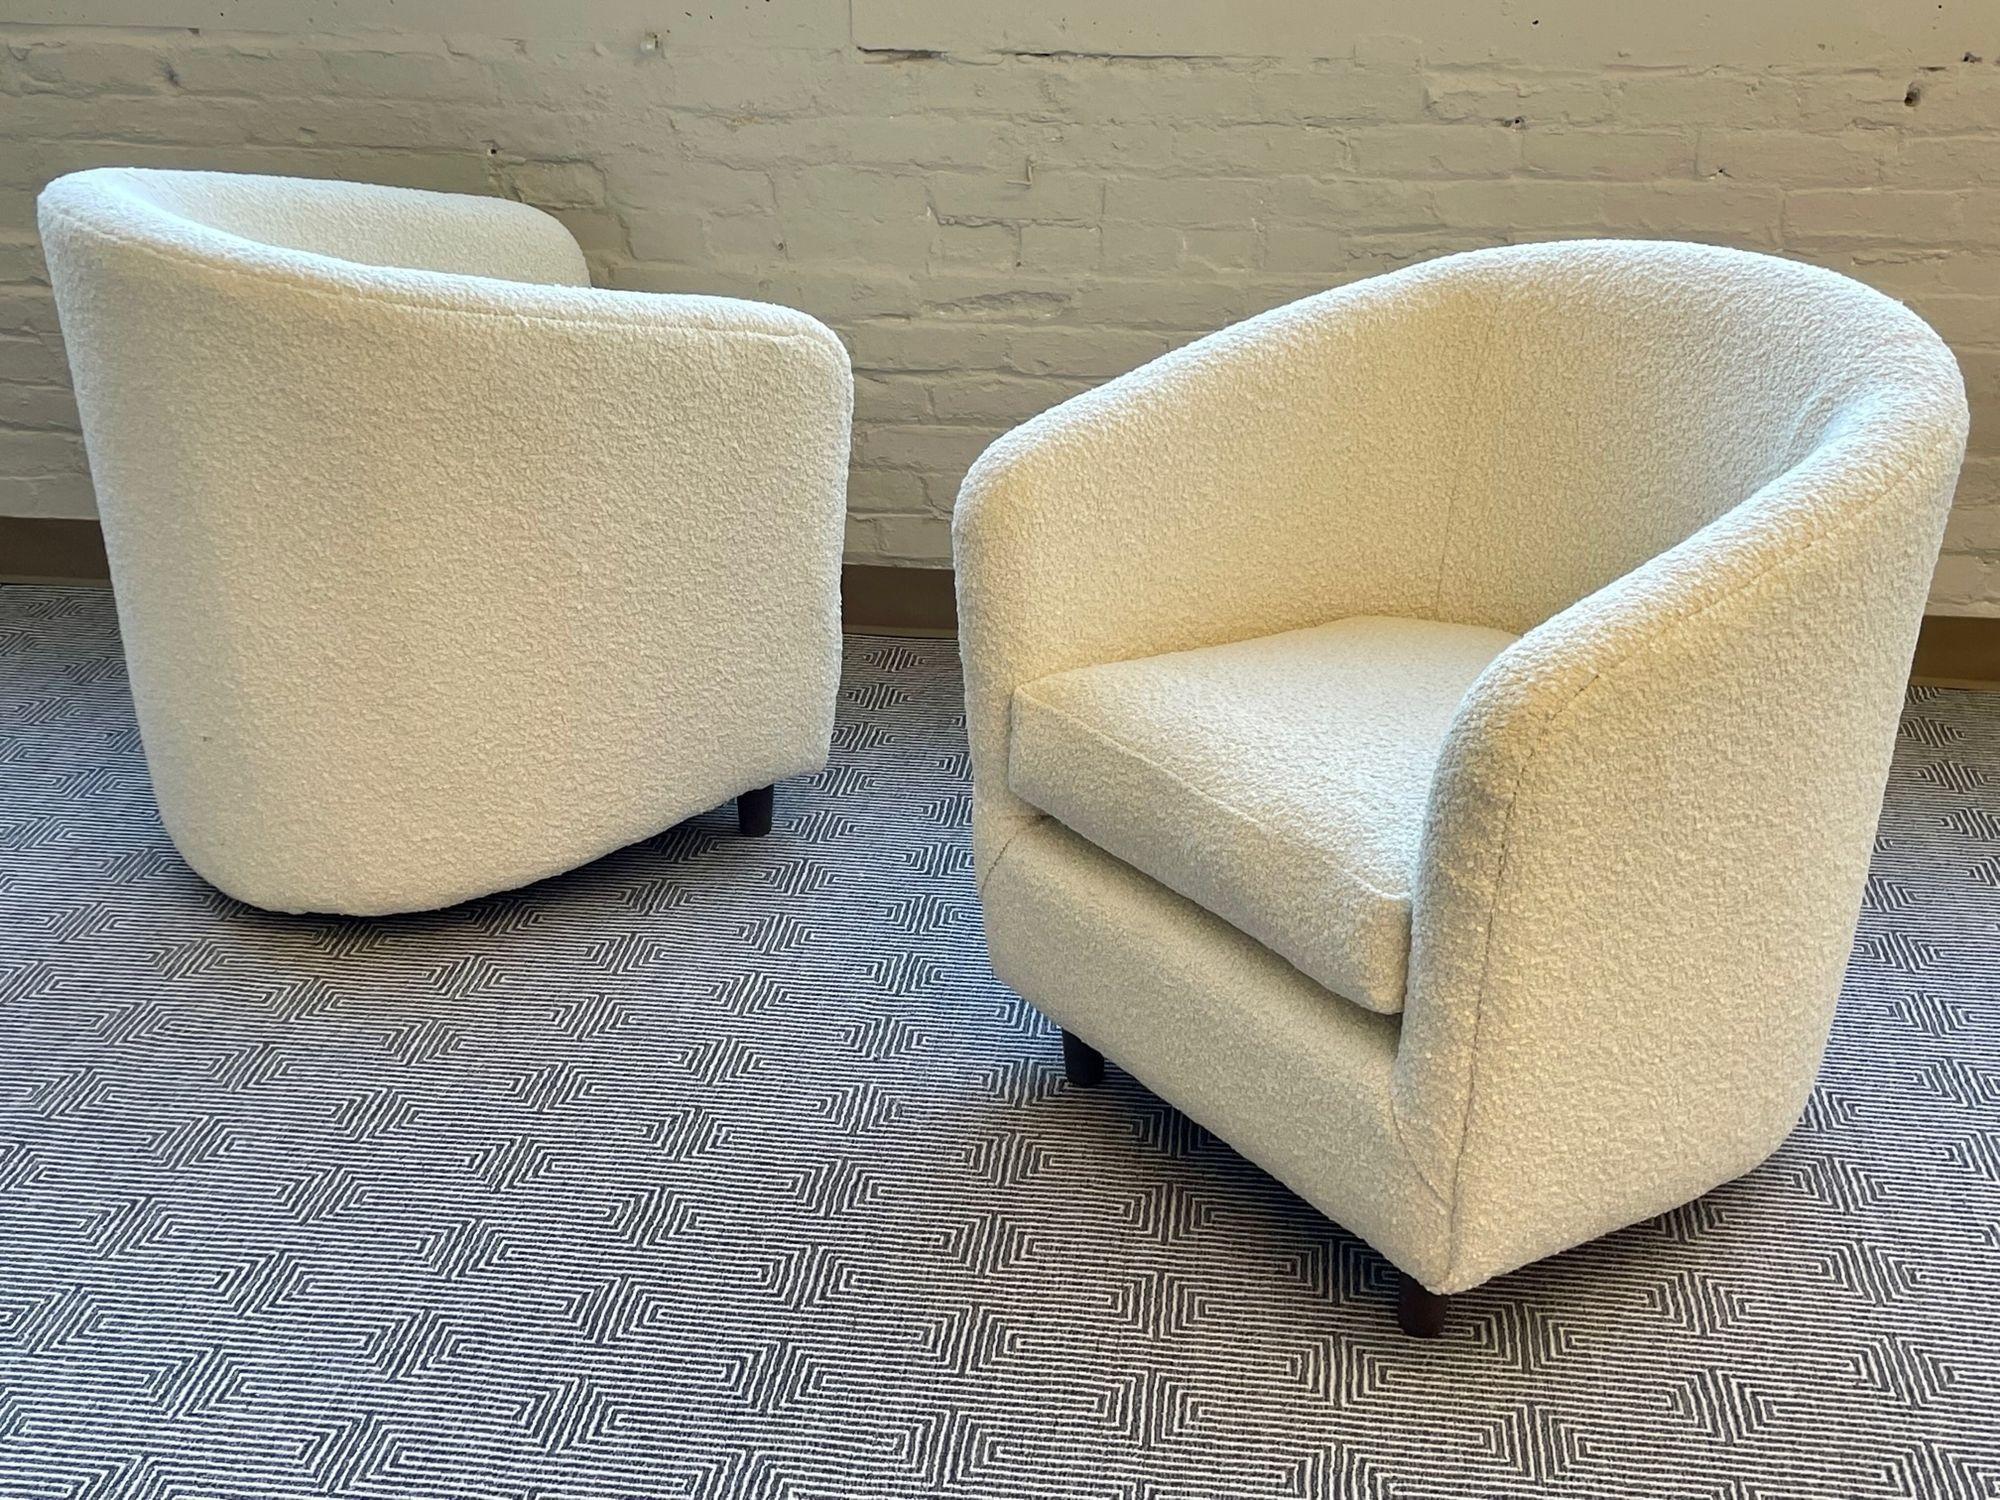 Pair of Mid-Century Modern Tub Chairs, Boucle, American Designer, 2000s
 
Mid-Century lounge chairs by an unkown American designer from the earlier 2000s. Newly upholstered in a thick, nubby, white boucle. 
 
Other American designers of the